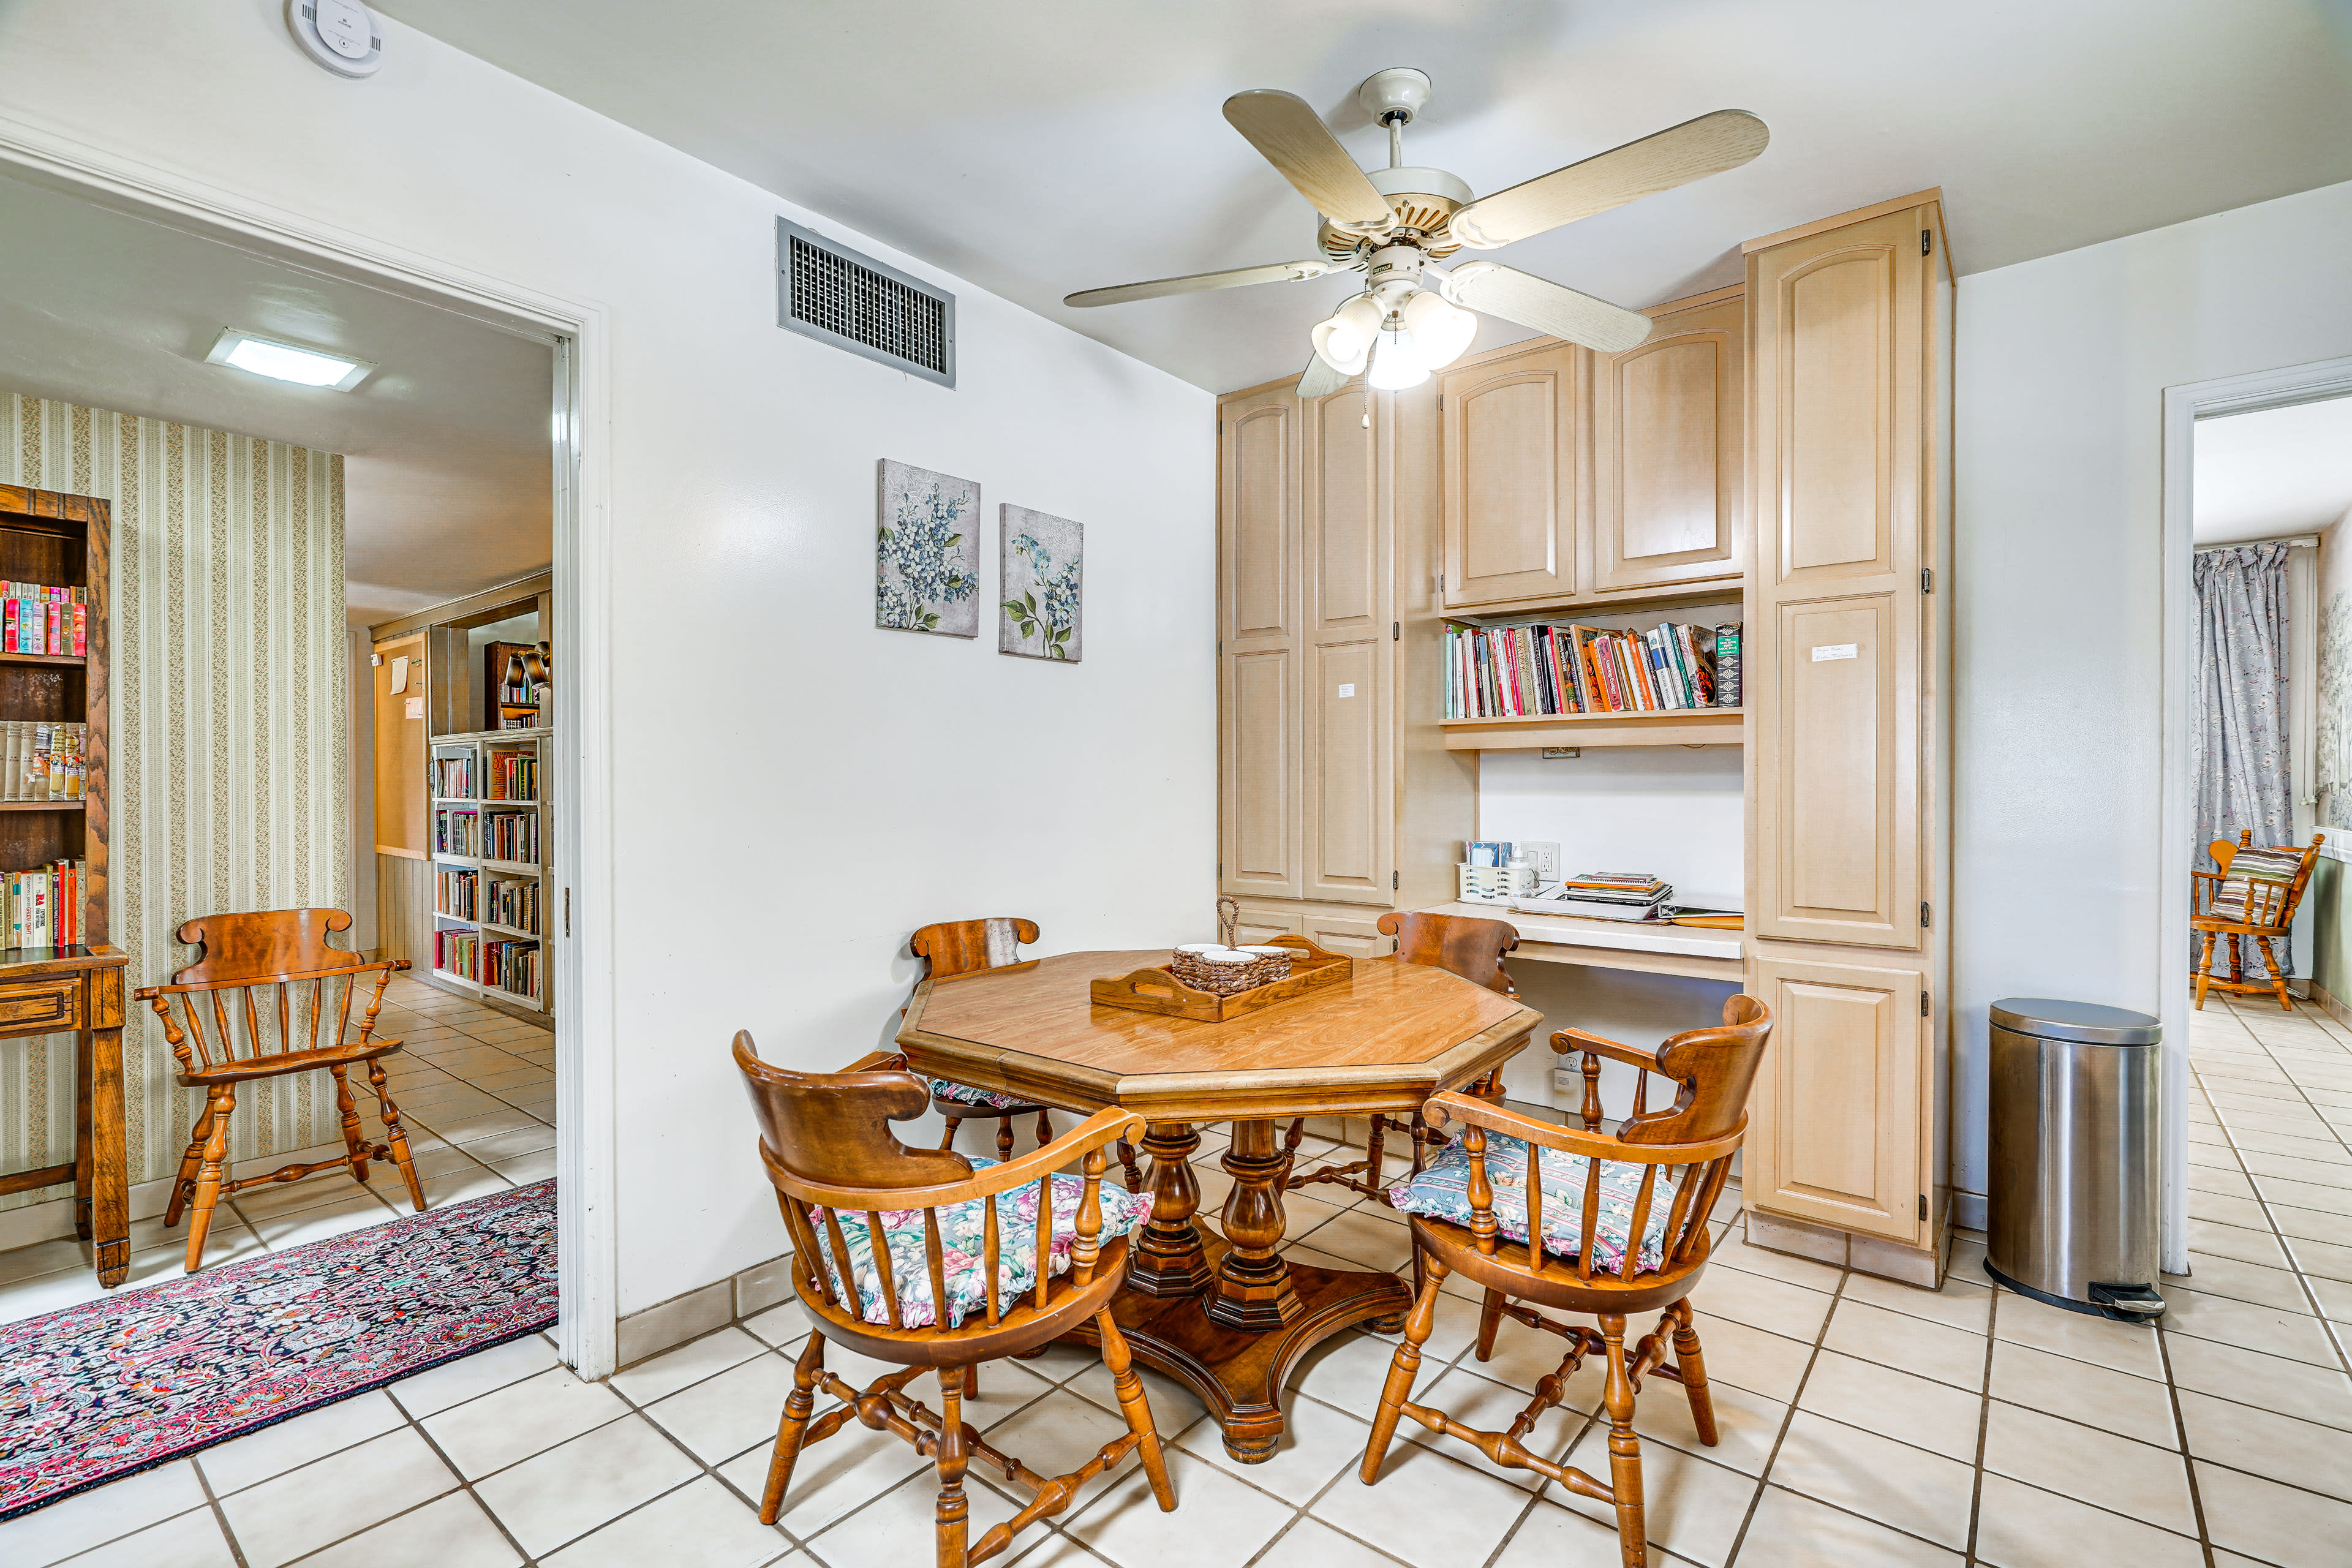 Breakfast Nook | Dishware & Flatware Provided | Central A/C & Heating